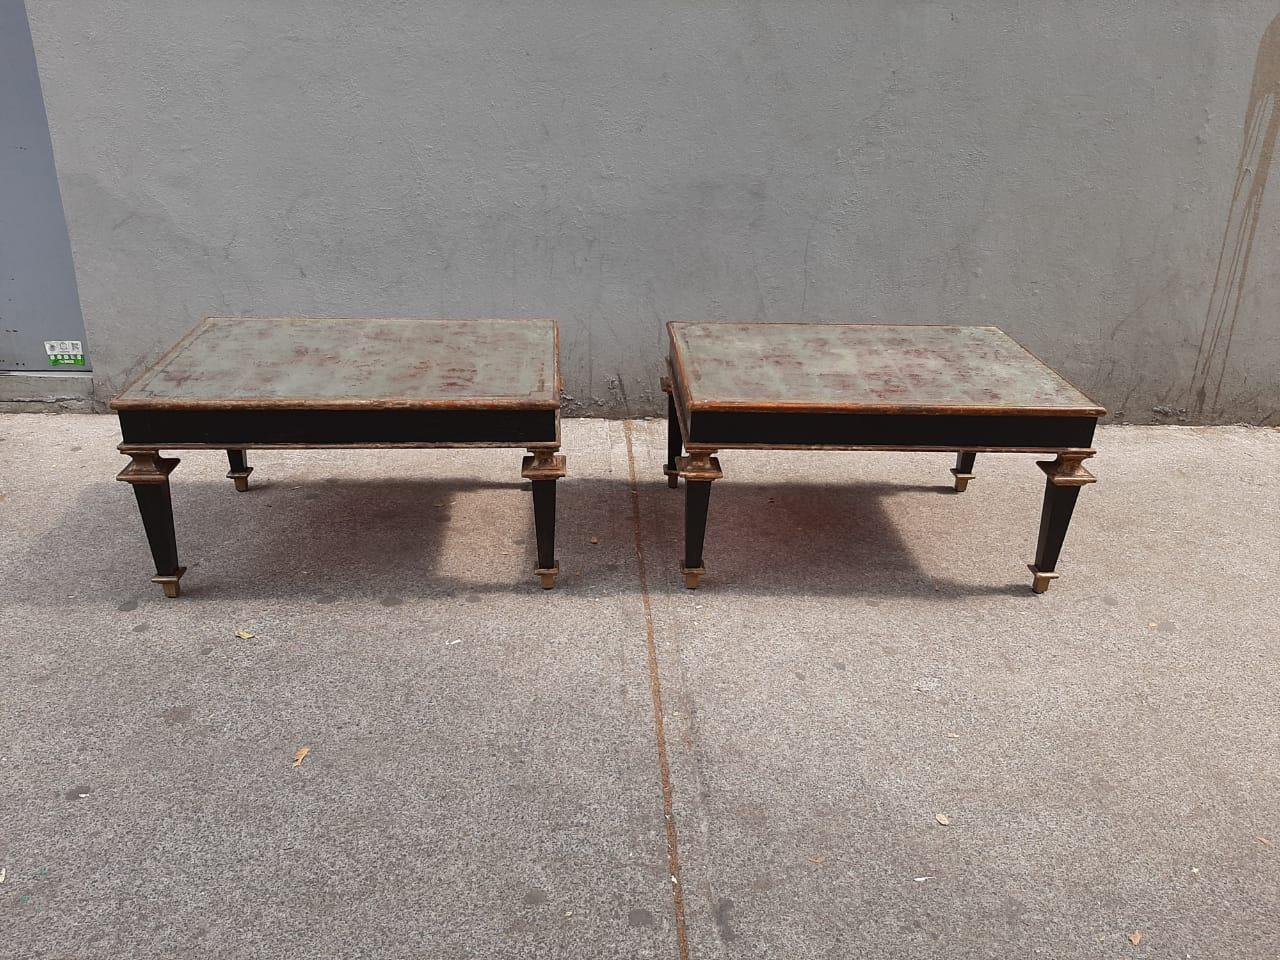 A pair of elegant Mexican Mid-Century Modern black lacquered mahogany side tables with silver leaf top, gilded edges by Arturo Pani. The rectangular tables have a distinctive Neoclassical inspired design. Manufactured circa 1950 in Mexico.